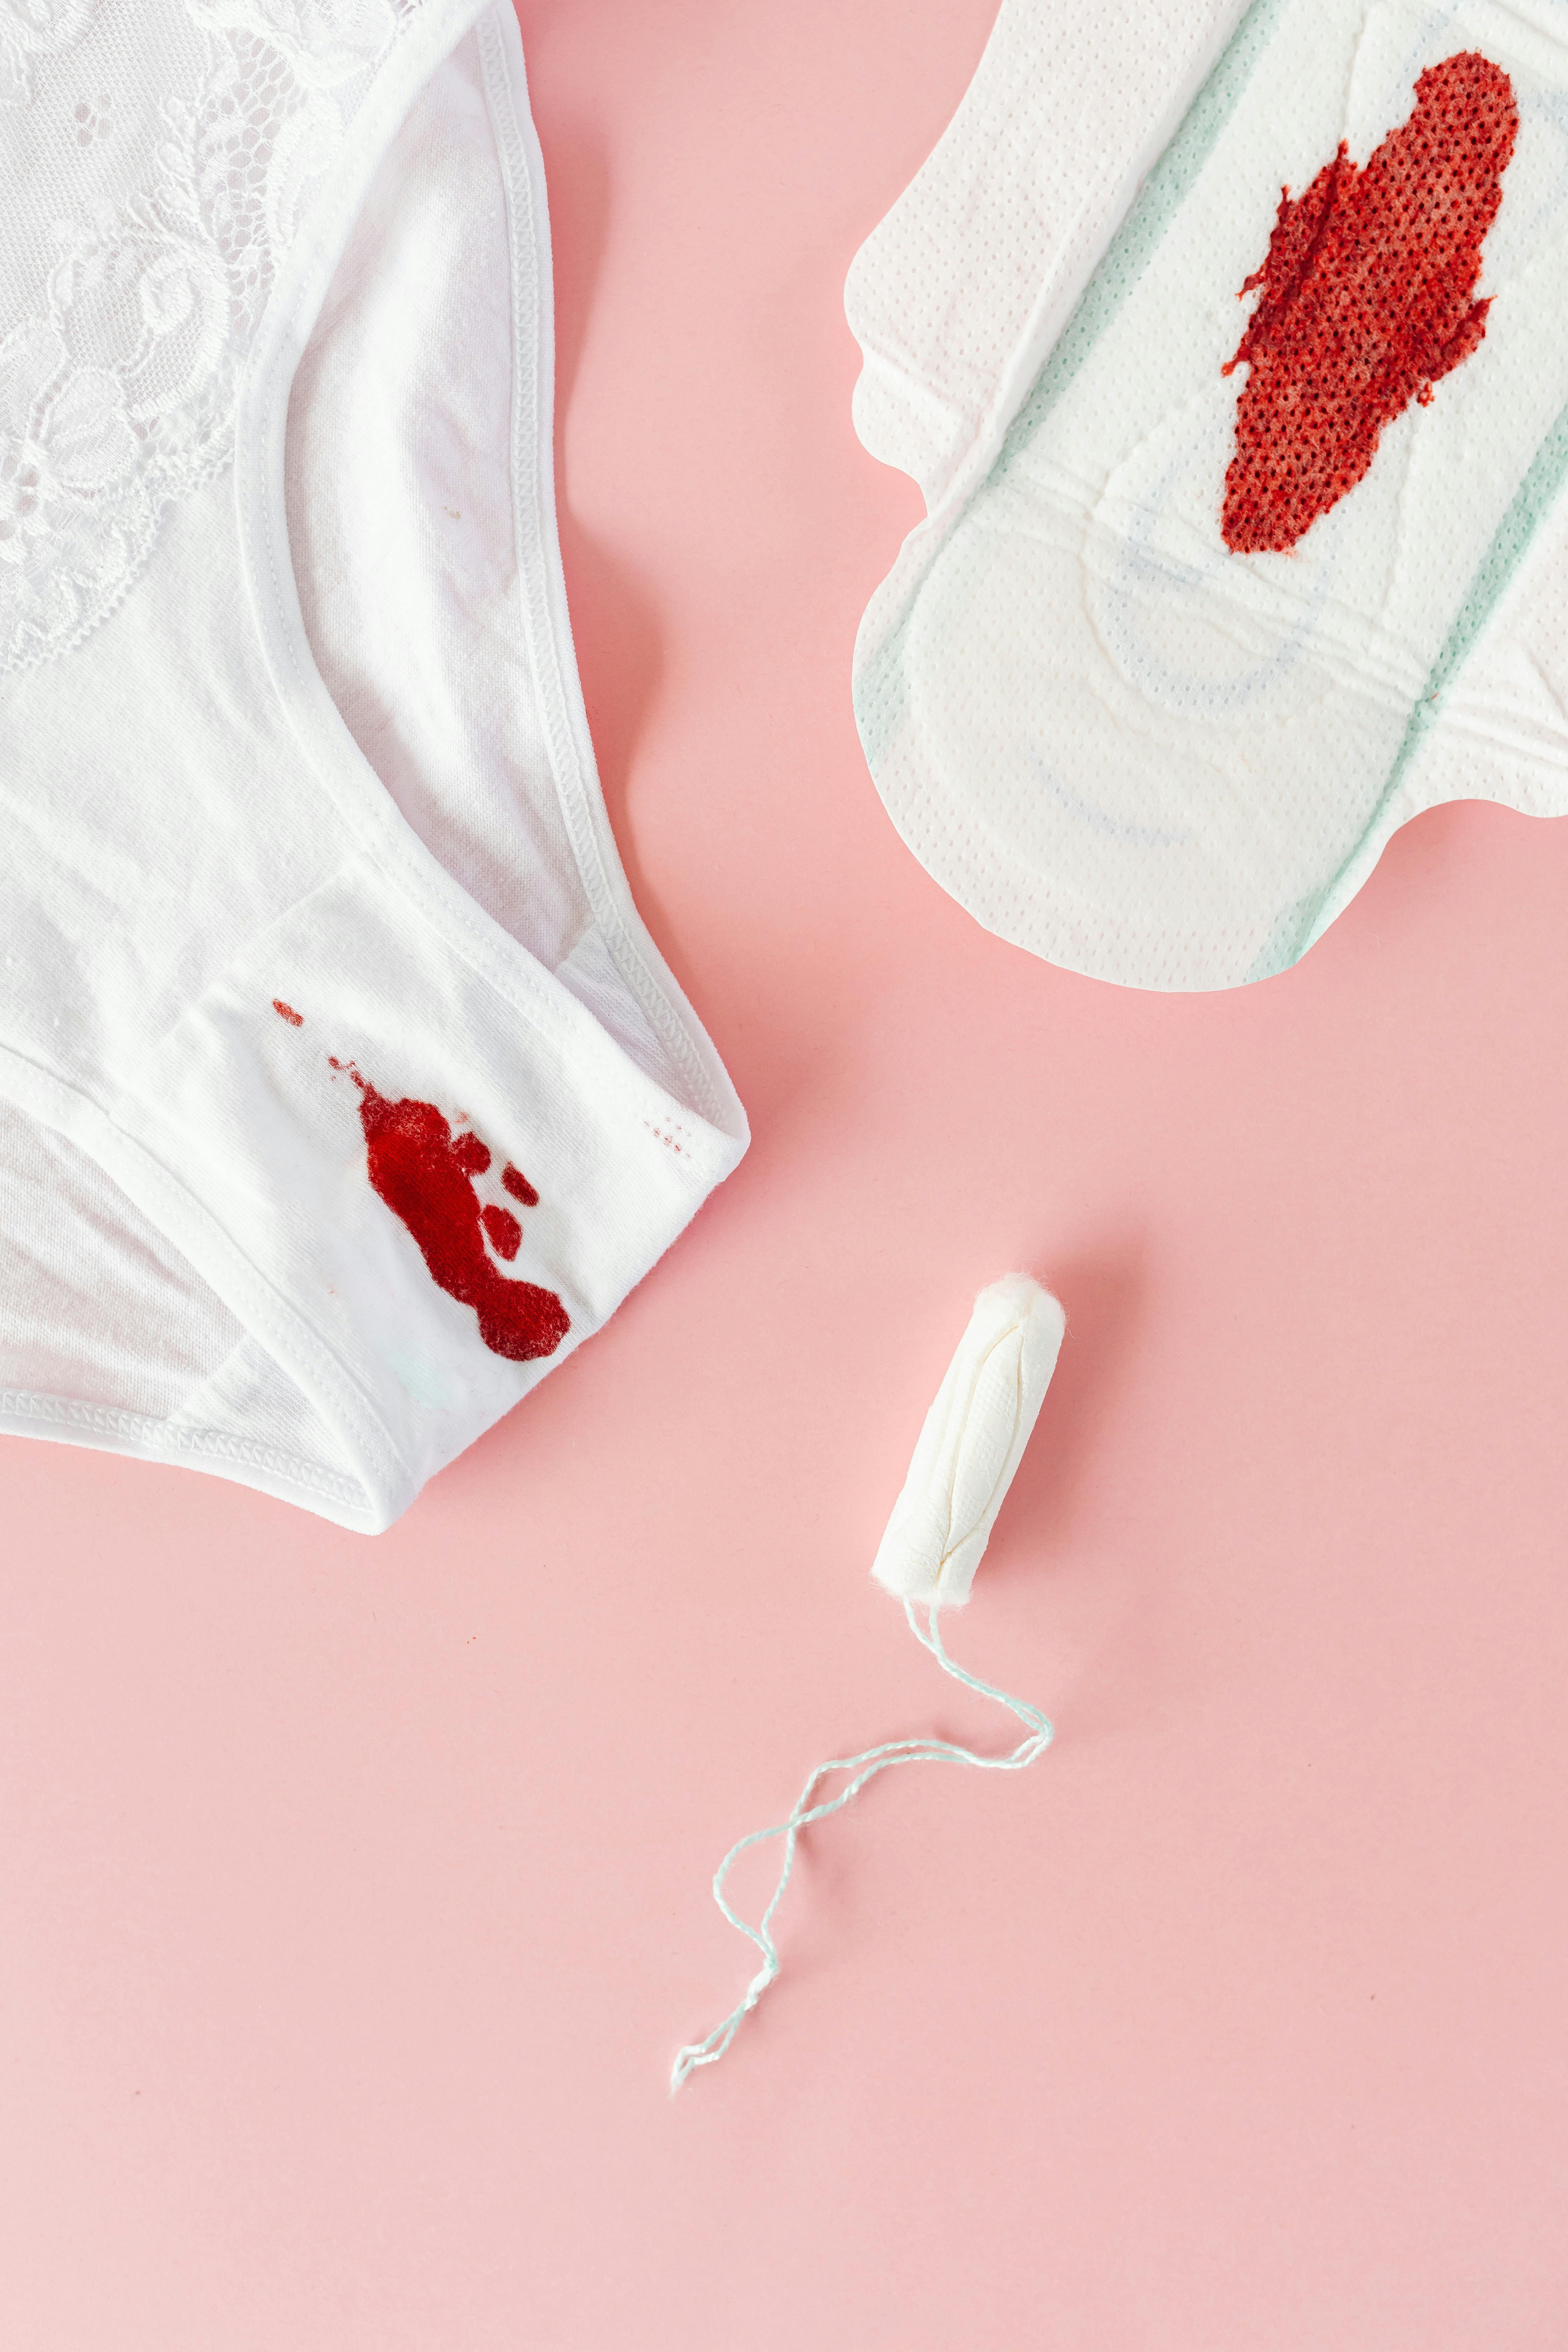 A Tampon beside an Underwear and a Napkin with Blood Stains · Free Stock  Photo